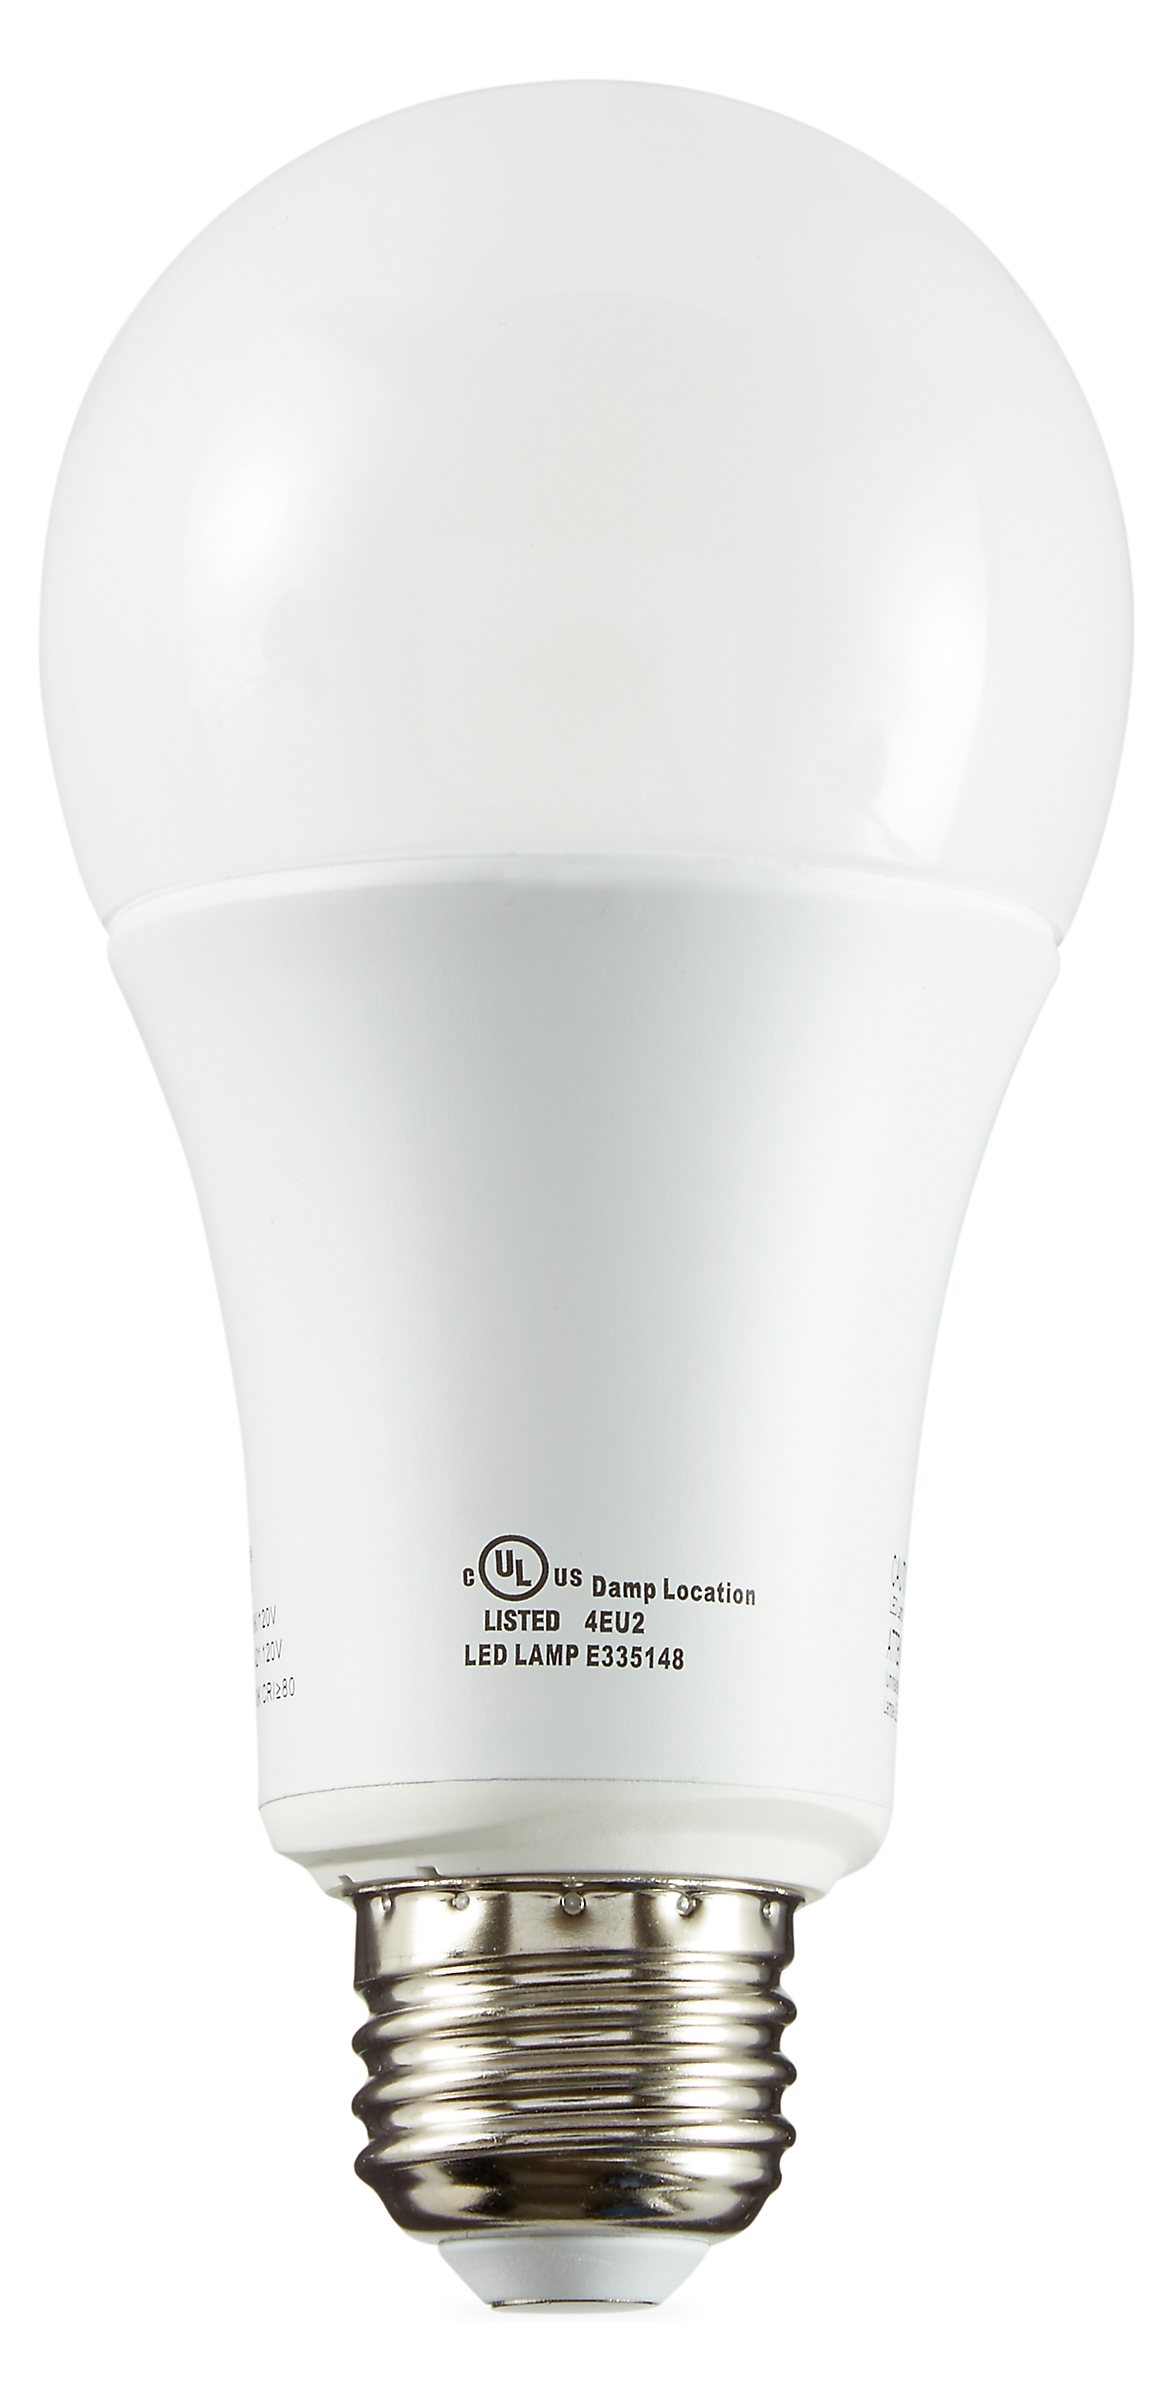 LED Non-Dimmable Light Bulbs, 100w Comparable - 4 Pack